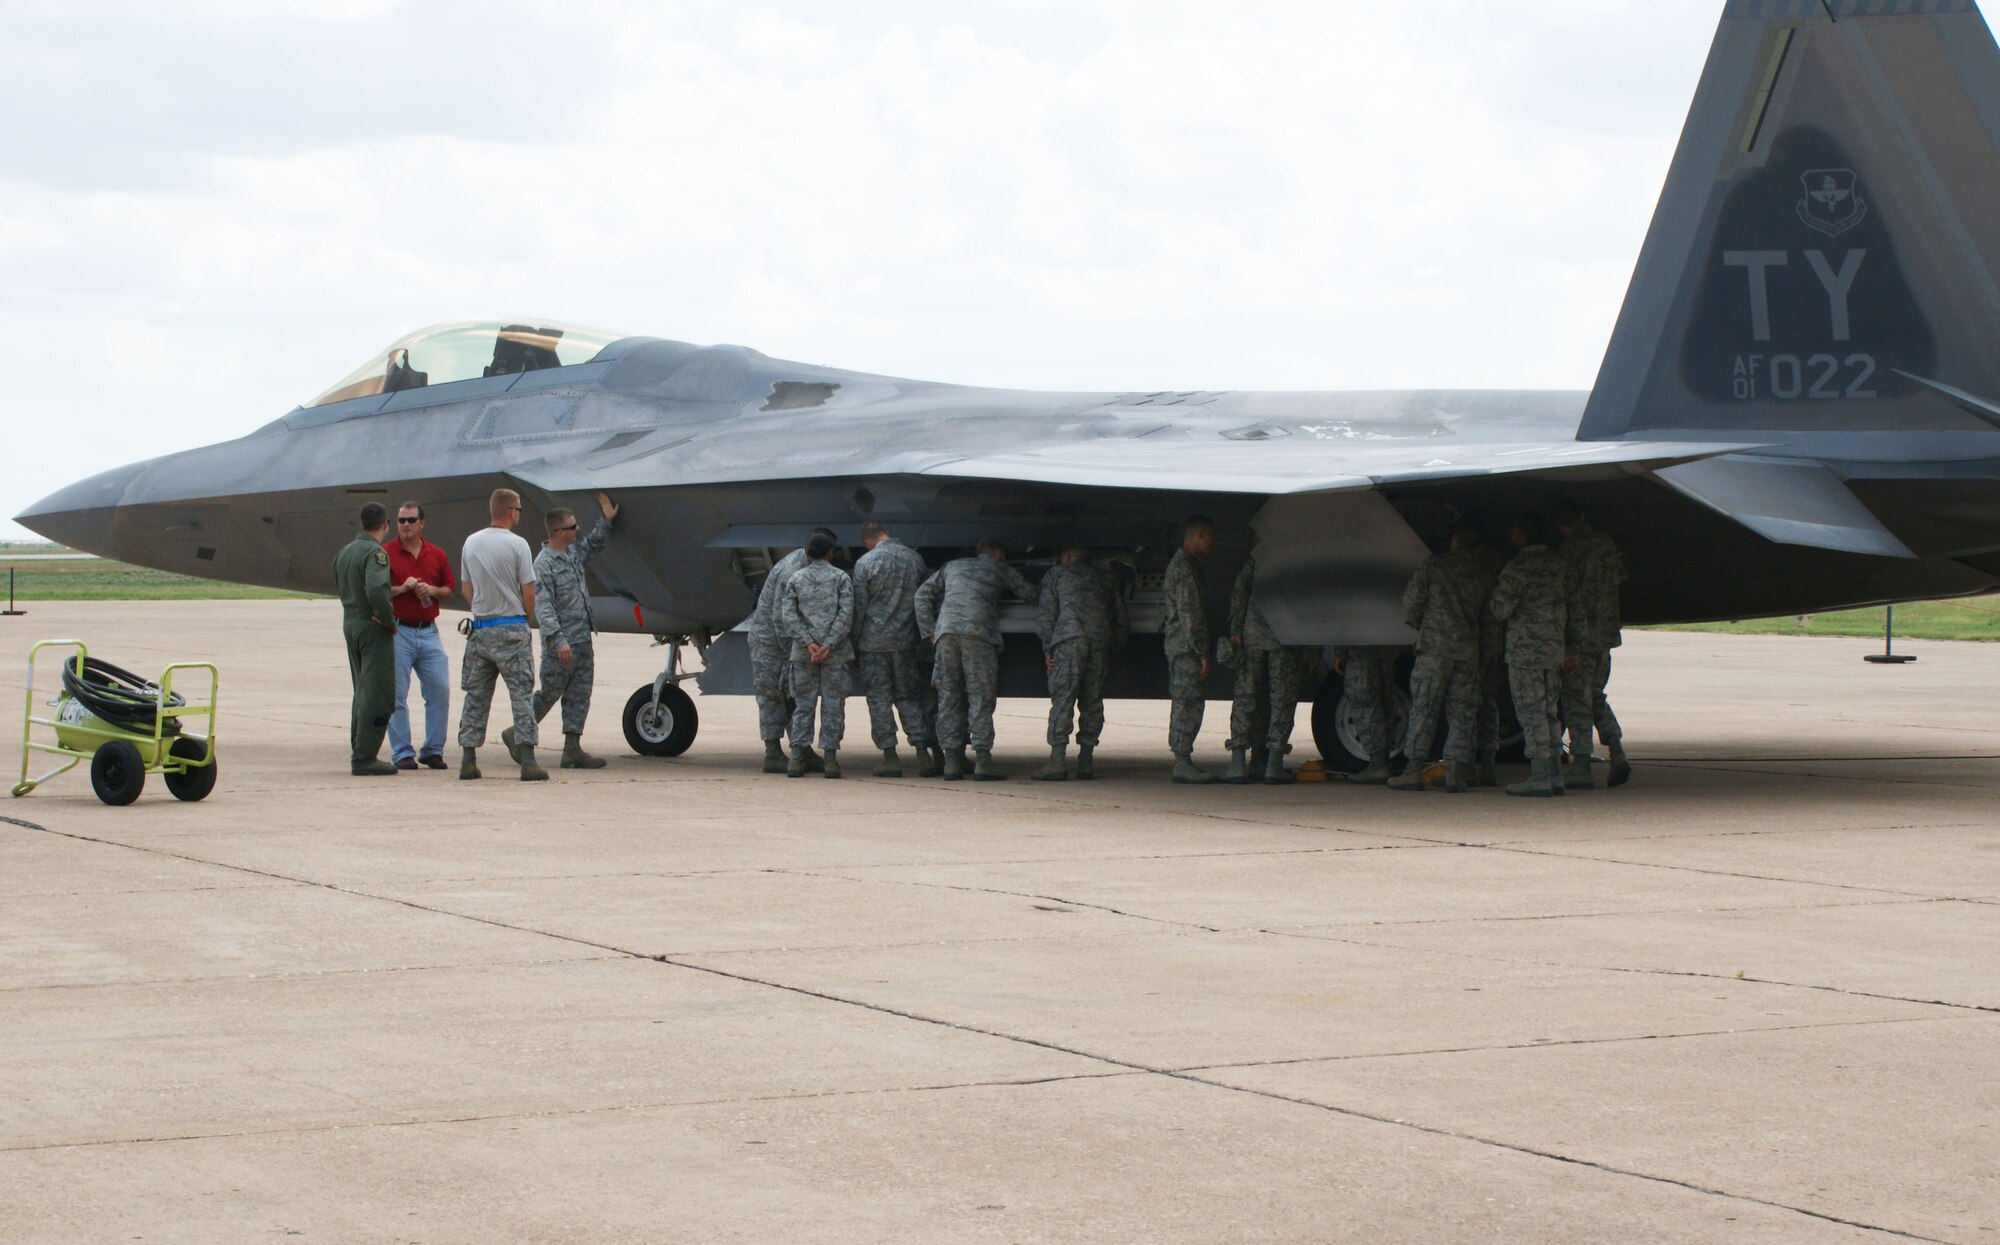 Students from the 363rd Training Squadron get armament familiarization training on the F-22 Raptor from 325th Aircraft Maintenance Squadron personnel Aug. 28, 2012 at Sheppard Air Force Base, Texas.  The 82nd Training Wing and 80th Flying Training Wing assisted in bedding down 14 aircraft and 40 personnel after their evacuation from Tyndall Air Force Base, Fla., due to Hurricane Issac.  (U.S. Air Force photo/Dan Hawkins)